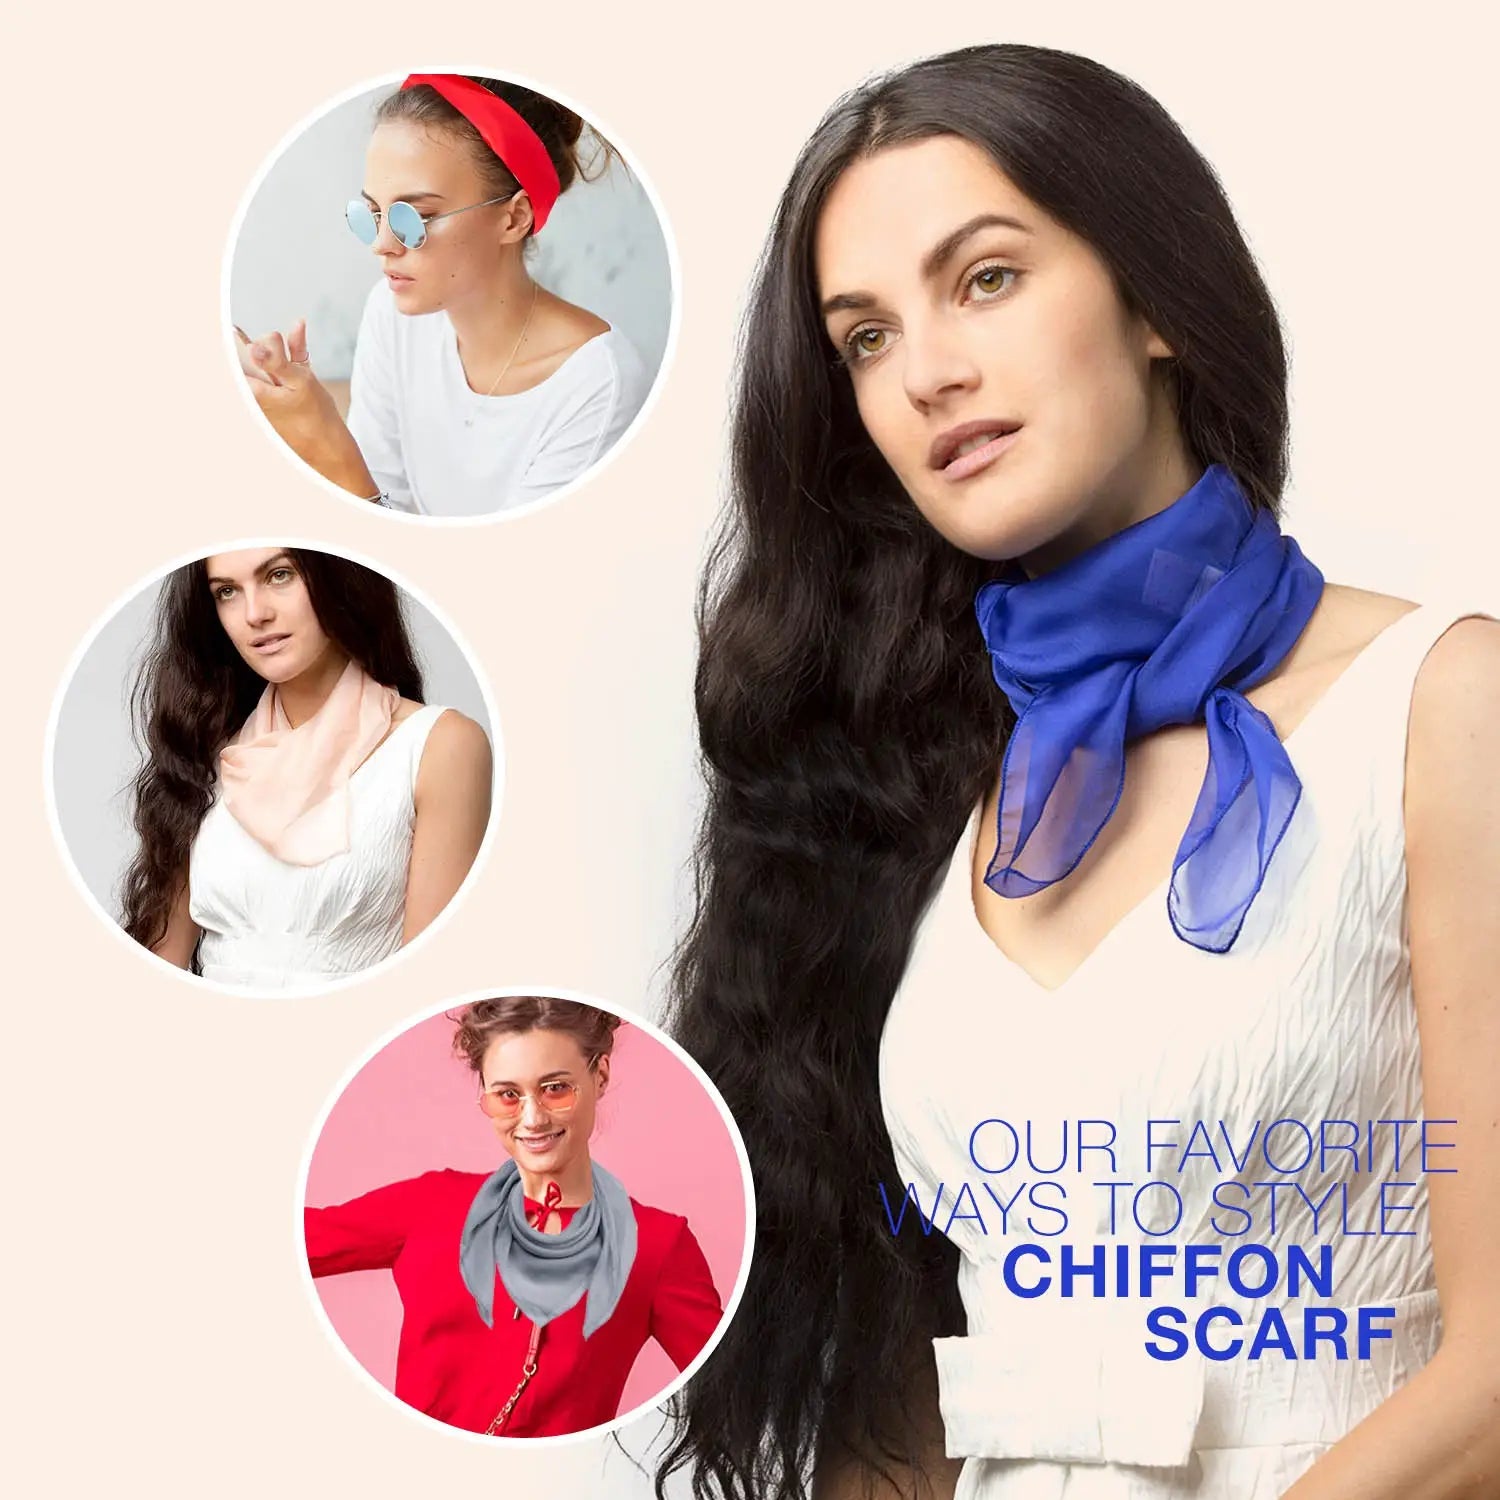 Woman wearing blue chiffon square scarf and red headband - Lightweight neck scarves for women.